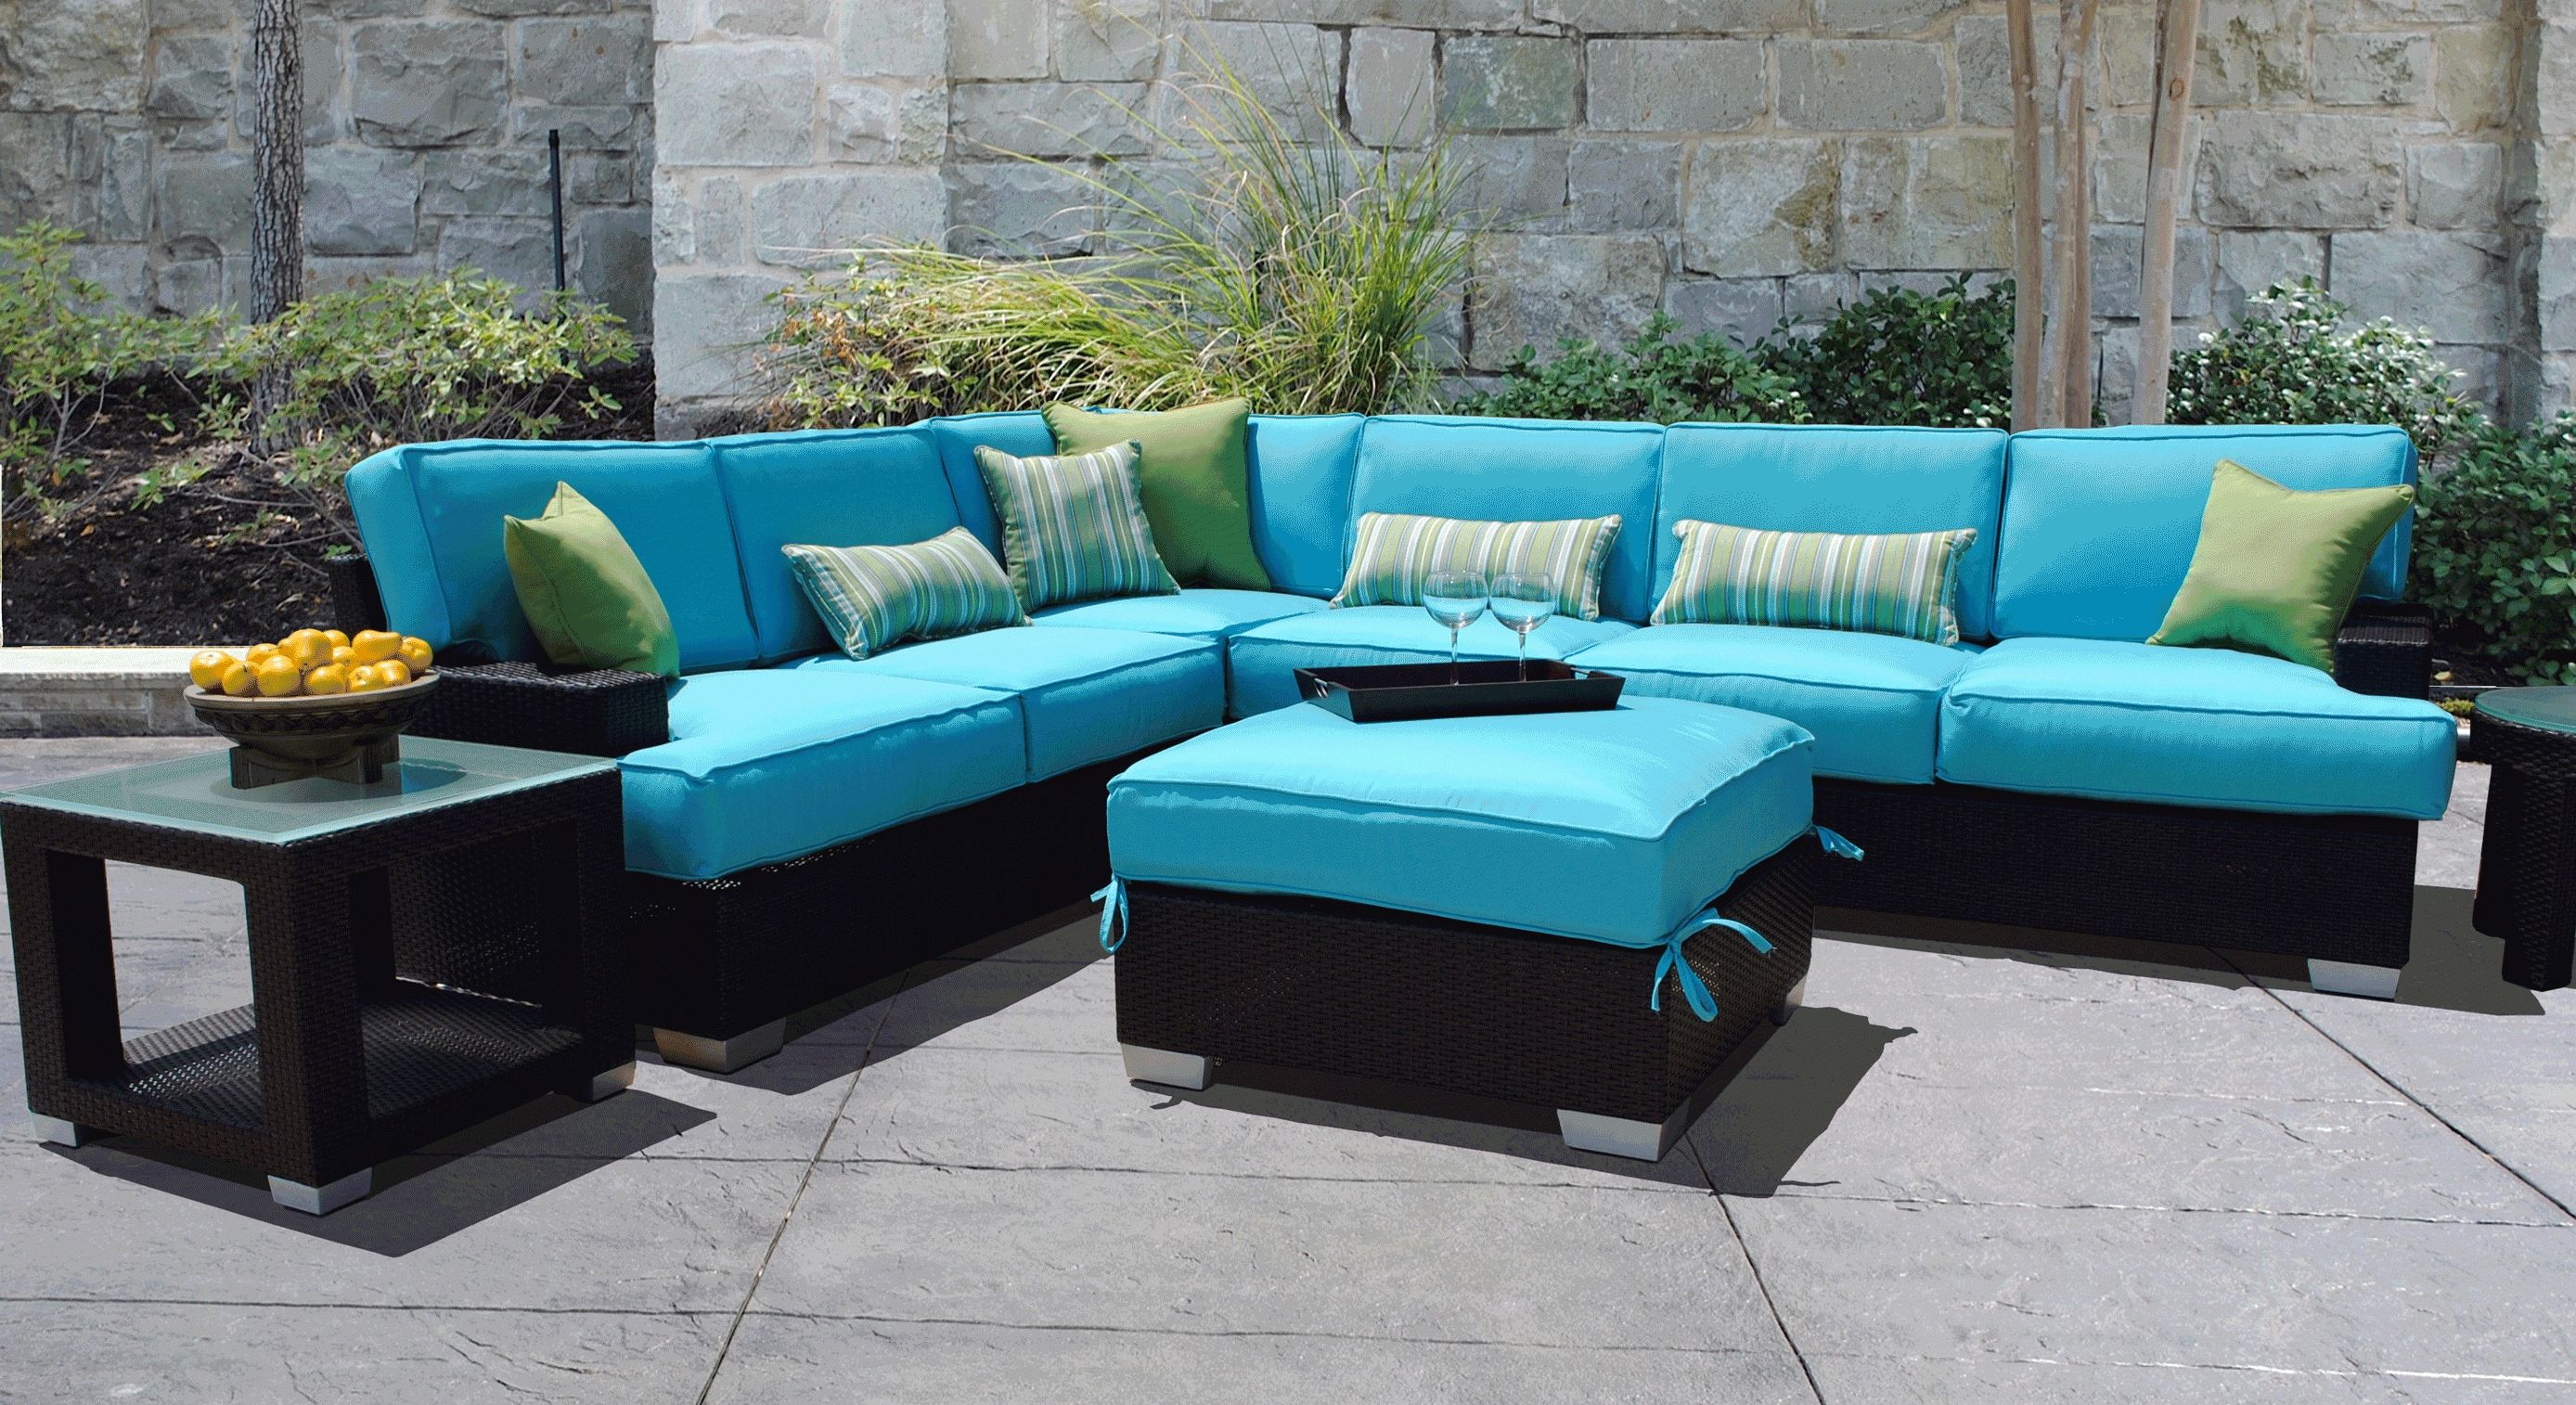 Deck: Wonderful Design Of Lowes Lawn Chairs For Chic Outdoor For Outdoor Sofa Chairs (View 12 of 30)